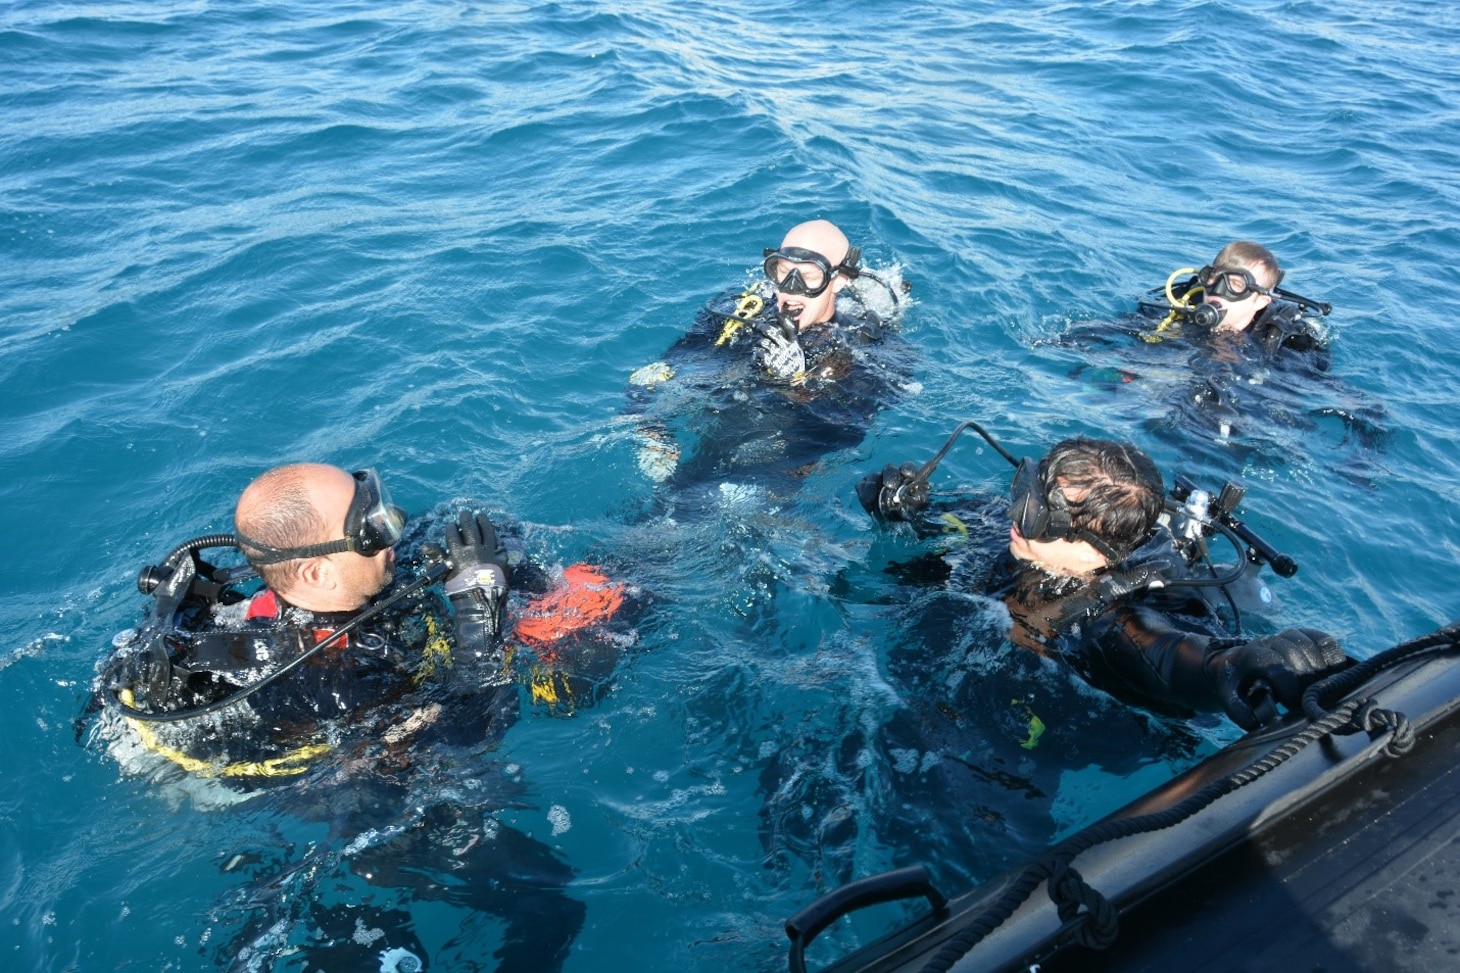 (Dec. 12, 2021) U.S. Navy divers, assigned to Construction Dive Detachment ALFA (CDD/A), a detachment of Underwater Construction Team (UCT) ONE, conduct joint dive training and exchange with the Cypriot National Guard, Cyprus Navy, Cyprus National Police, and Cyprus Fire Service personnel, Dec. 12, 2021. The training and exchange covers dive operations, dive medicine, underwater search techniques, and rescue operations. The UCT CDDs are specially trained and equipped units within the Navy Expeditionary Combat Force that construct, inspect, repair and maintain ports, ocean facilities, underwater systems and general maritime infrastructure.